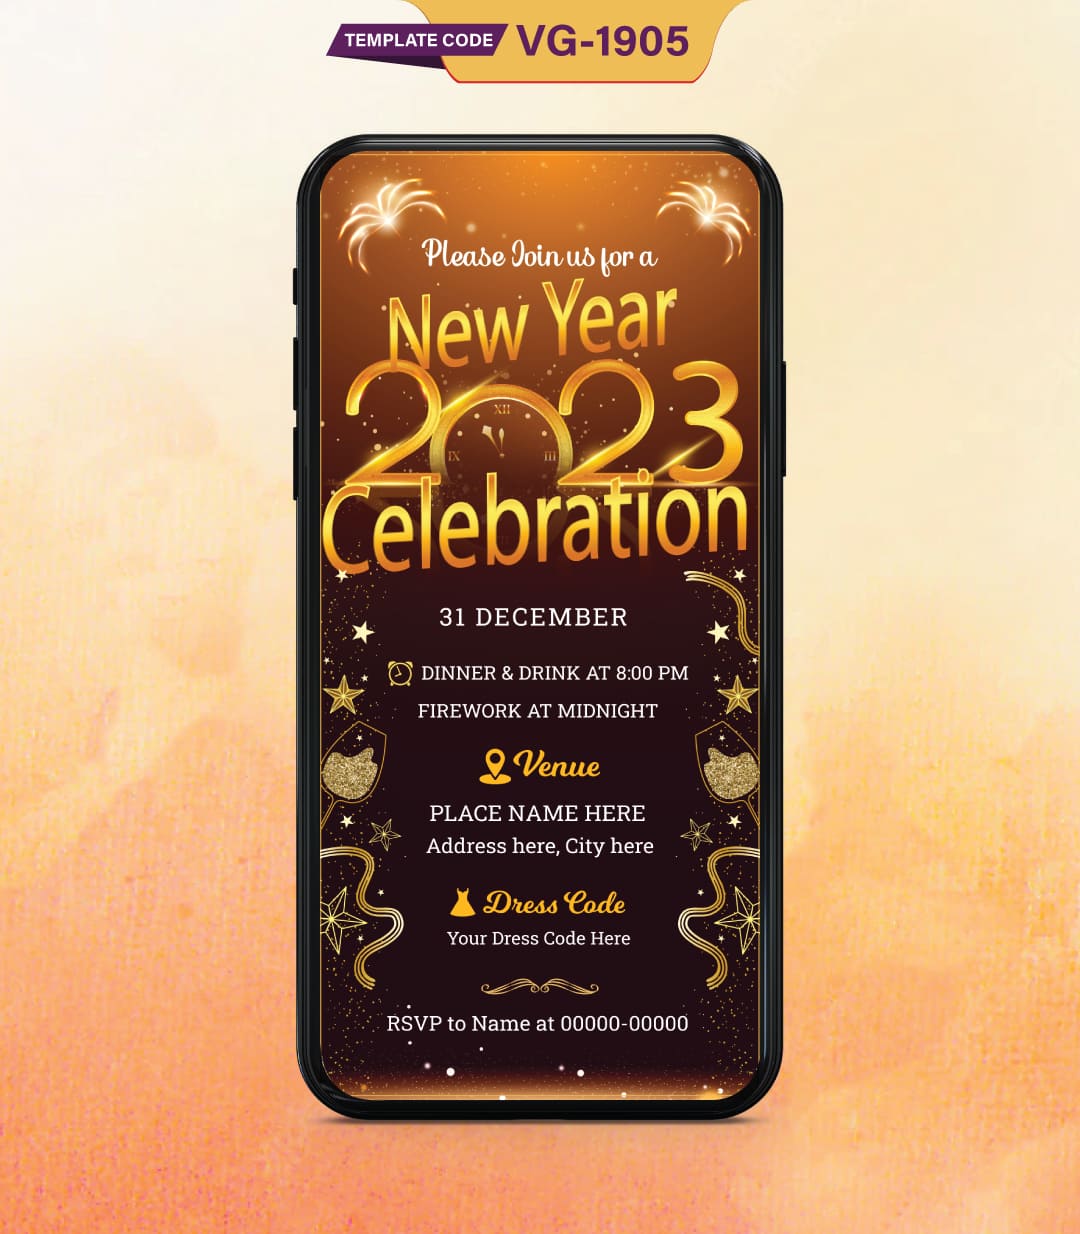 New Year’s Eve Party Invitations